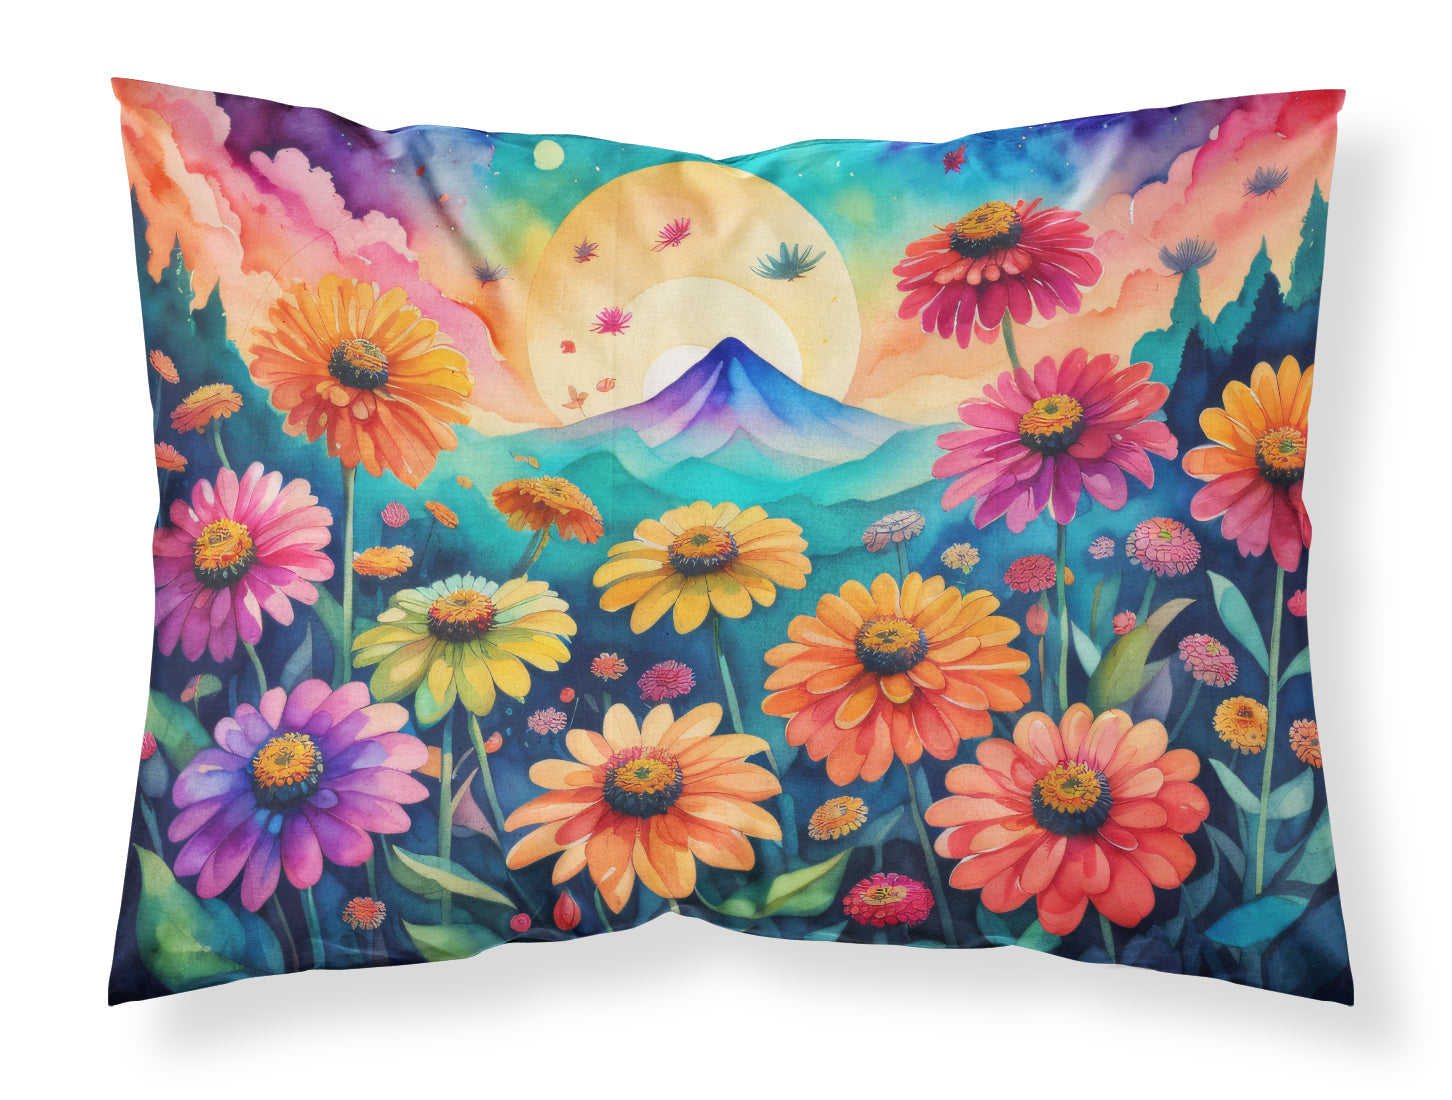 Buy this Zinnias in Color Fabric Standard Pillowcase